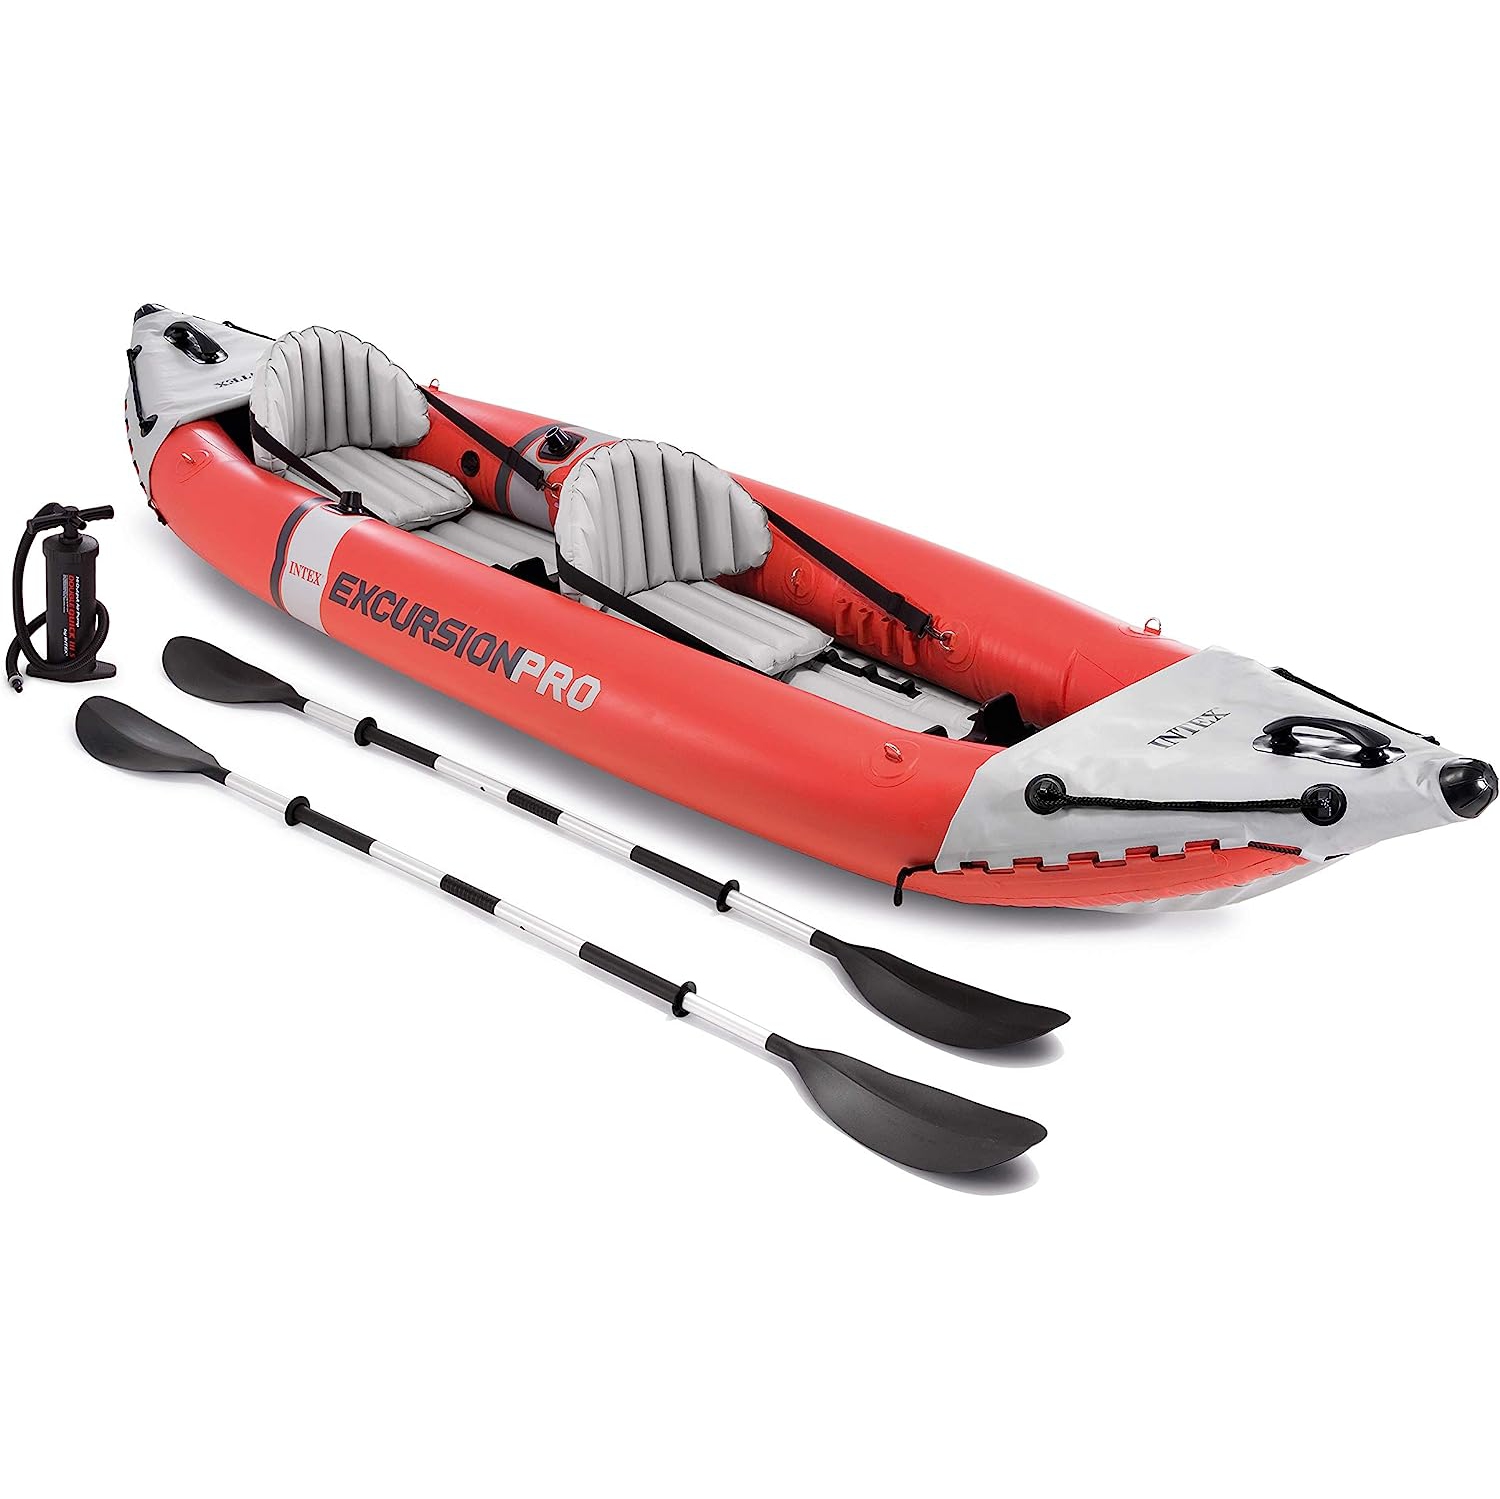 Intex Excursion Pro Inflatable Fishing Kayak Set with Aluminum Oars and High Output Air Pump| 2-Person